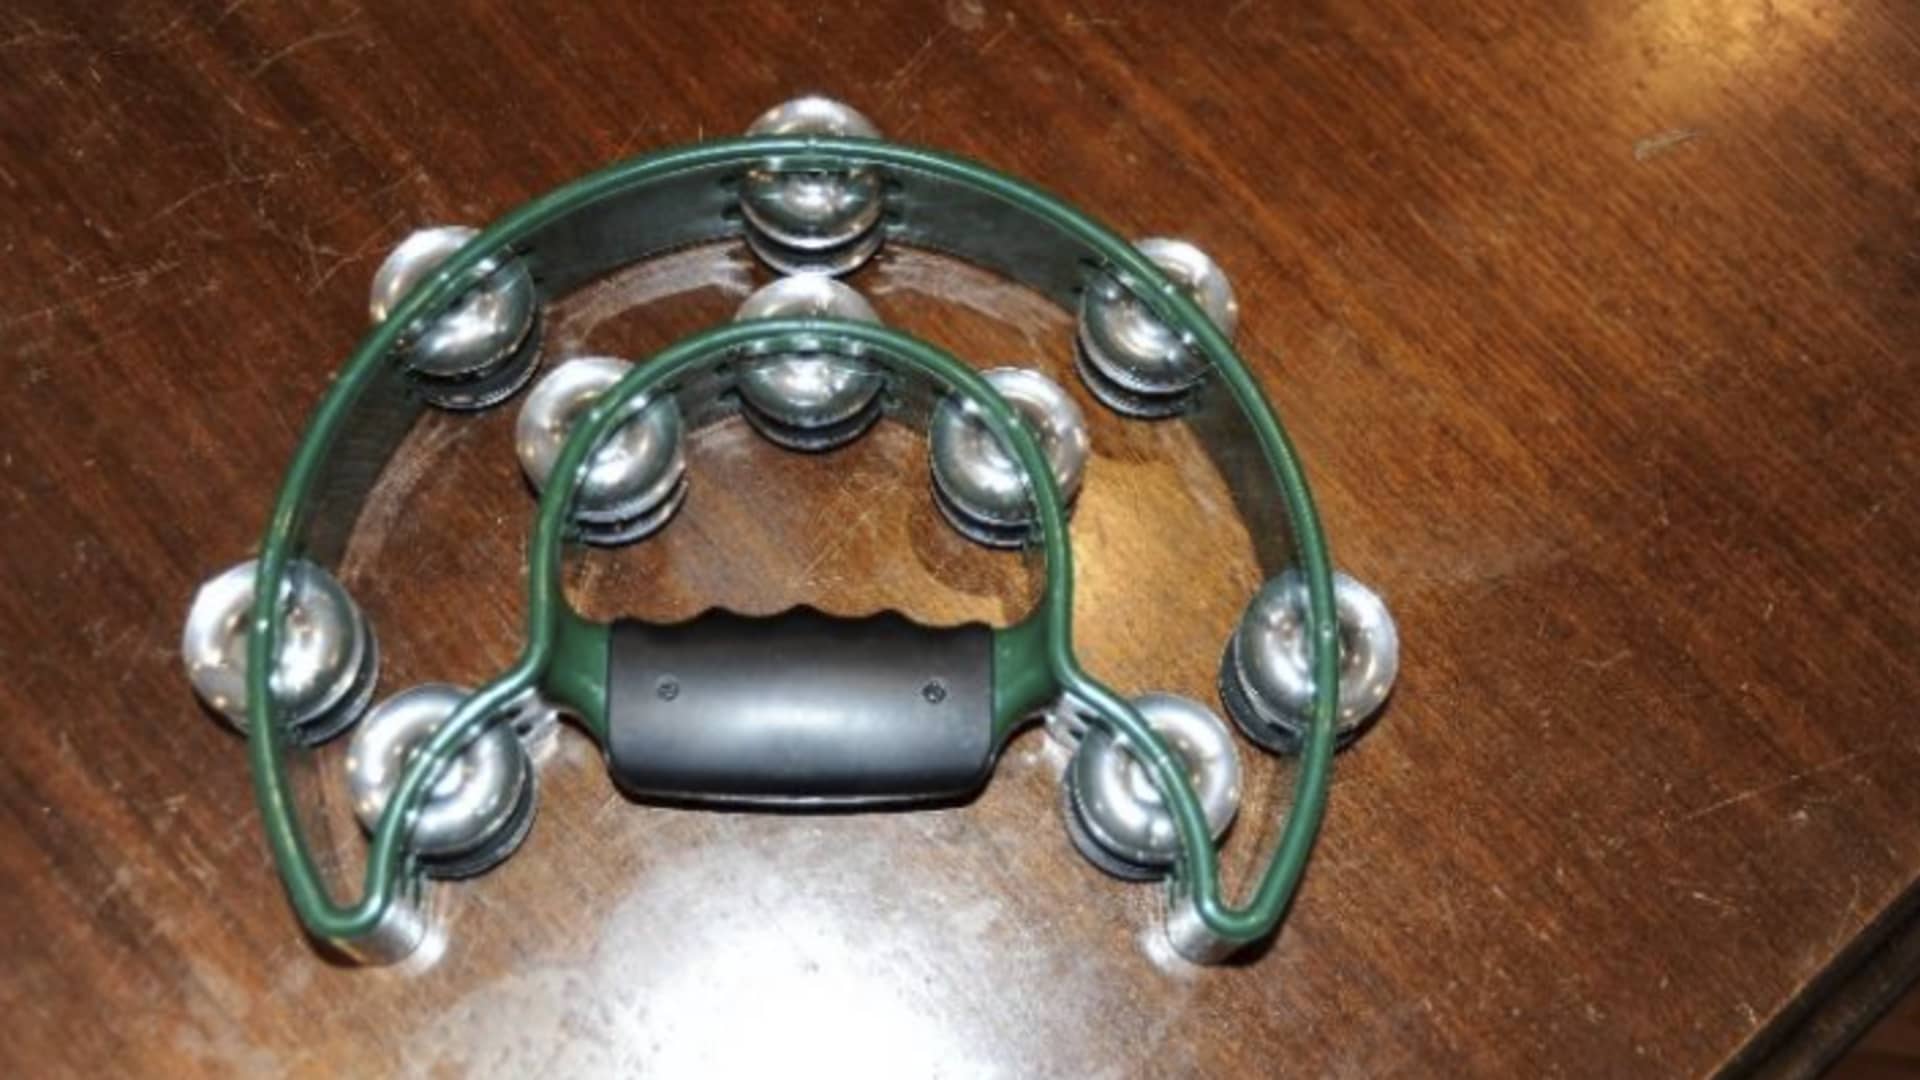 DOJ submits photo of a tambourine as part of a Statement of Facts related to former NYPD officer Sara Carpenter participating in the Capitol Riots on Jan. 6th, 2021.